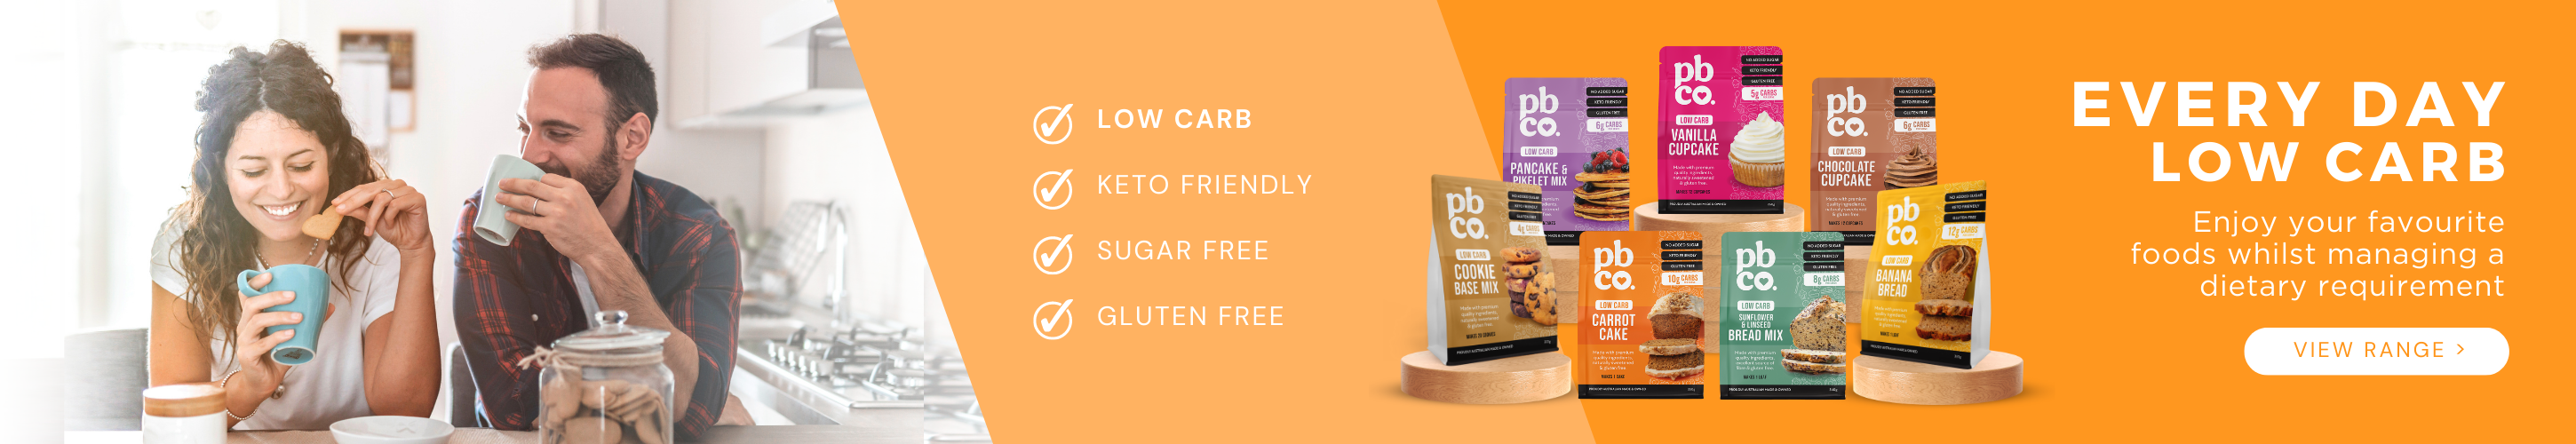 PBCo_Lifestyle_Foods_every_day_low_carb_product_range banner